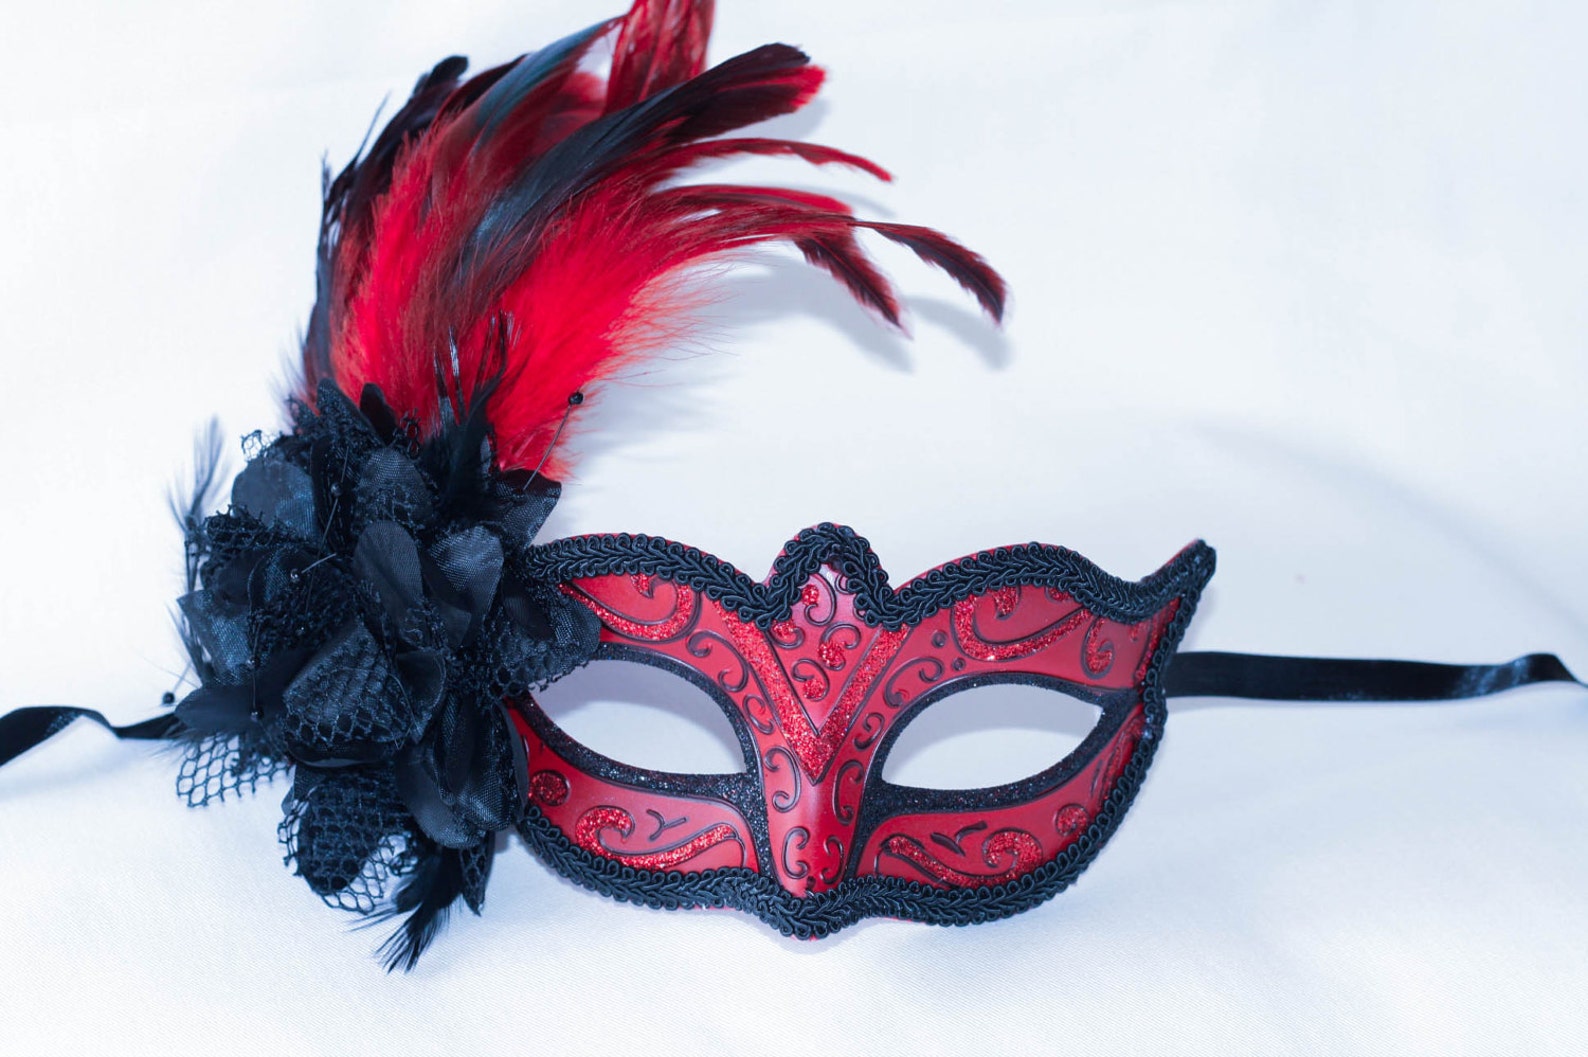 Phantom Black and red masquerade mask with feathers Hers | Etsy